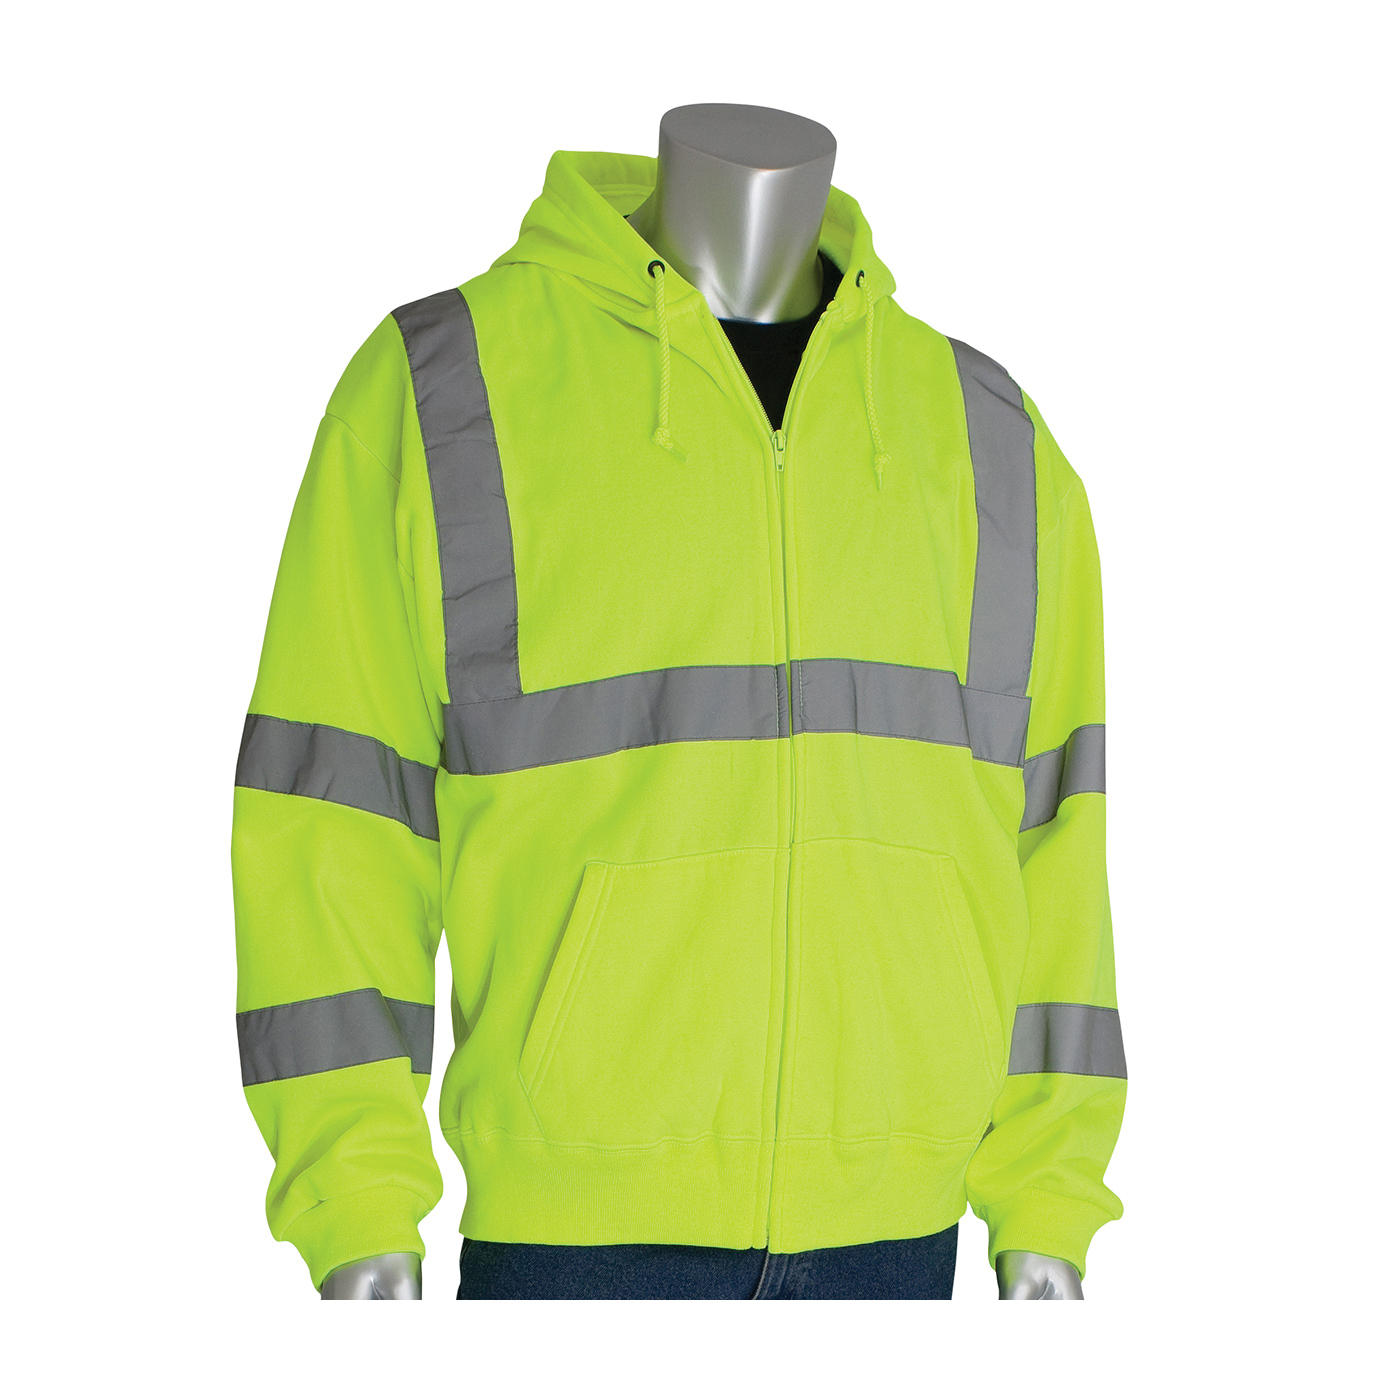 PIP® SafetyGear 323-HSSELY-M Premium High Visibility Sweatshirt, M, Yellow, Wicking Polyester, 26.7 in L